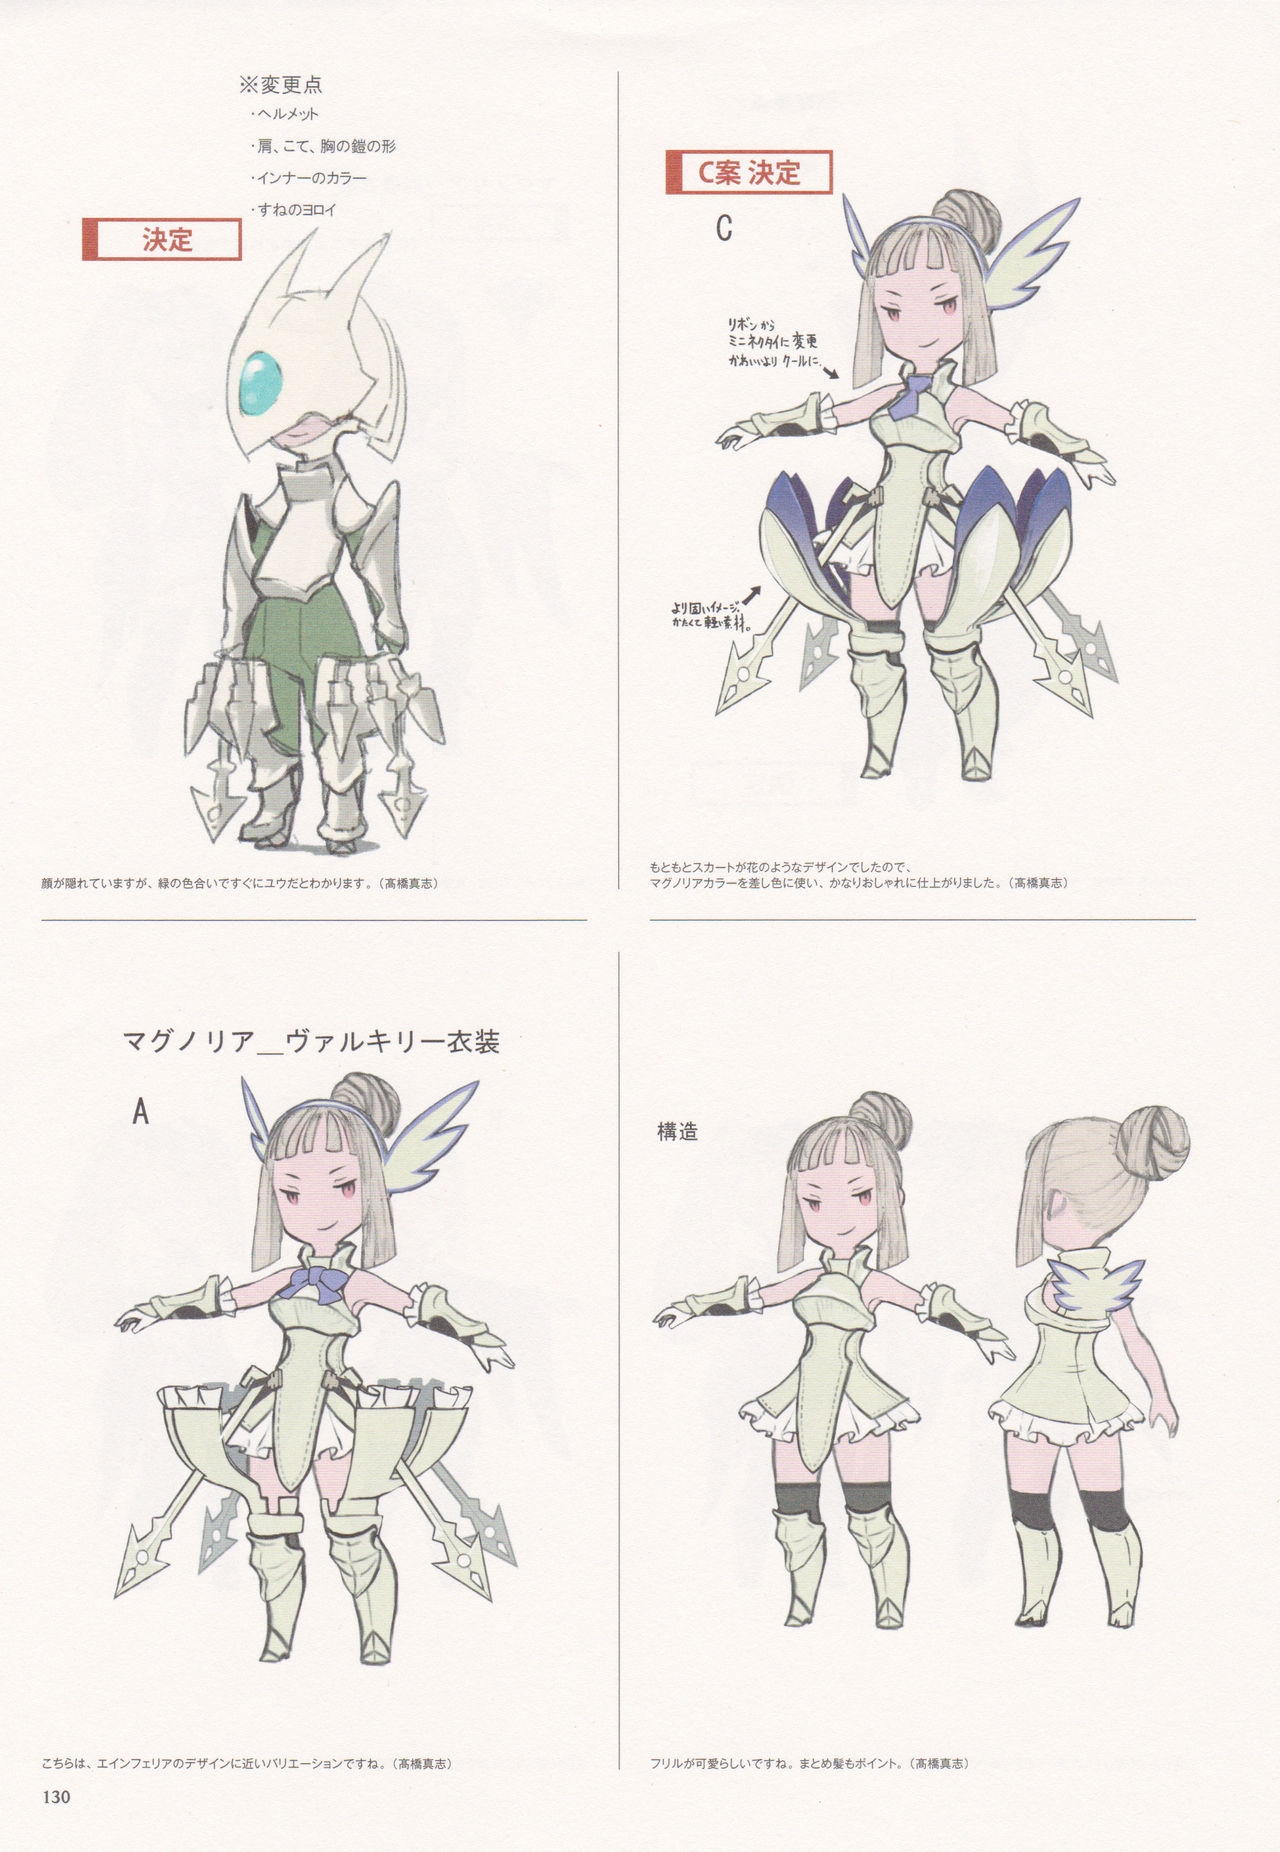 Bravely Second - End Layer - Design Works THE ART OF BRAVELY 2013-2015 130